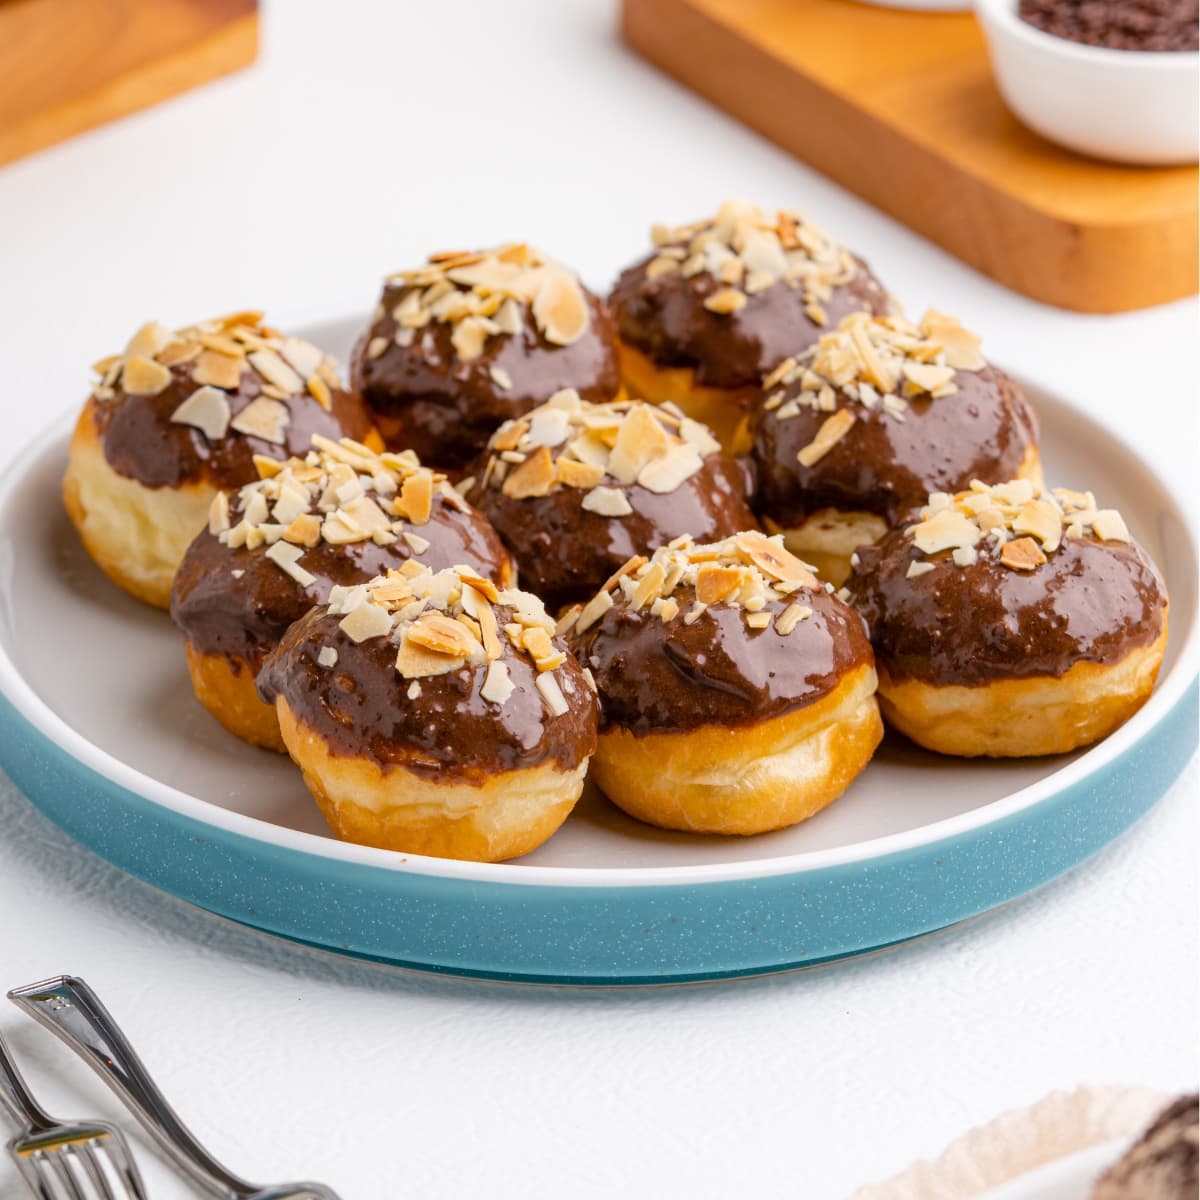 Delicious donuts with chocolate frosting and nuts